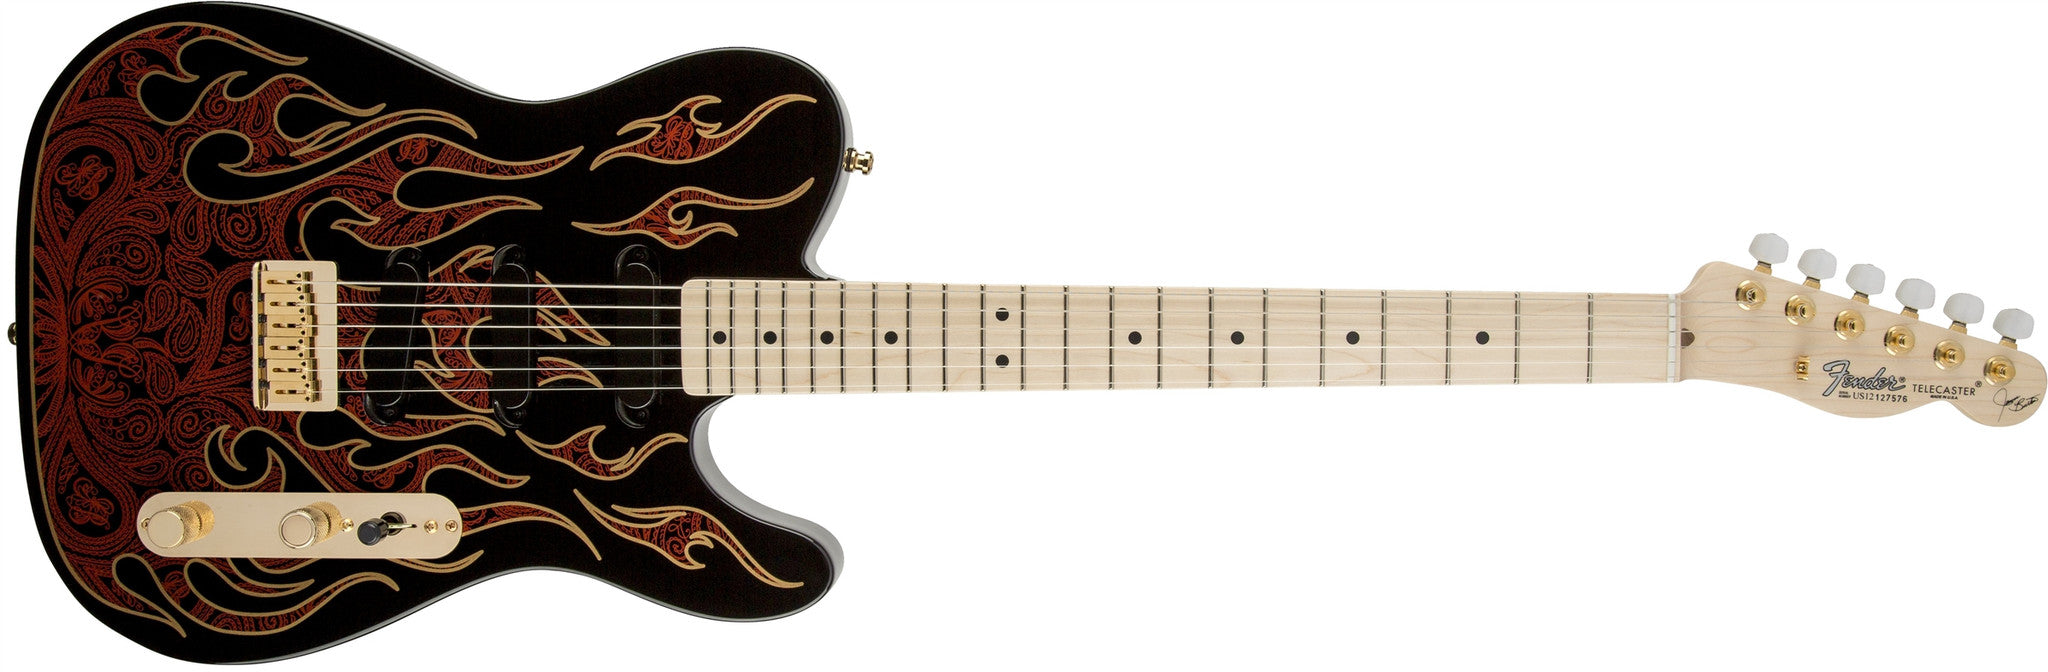 Fender James Burton Telecaster®, Maple Fingerboard, Red Paisley Flames 0108602887 - L.A. Music - Canada's Favourite Music Store!